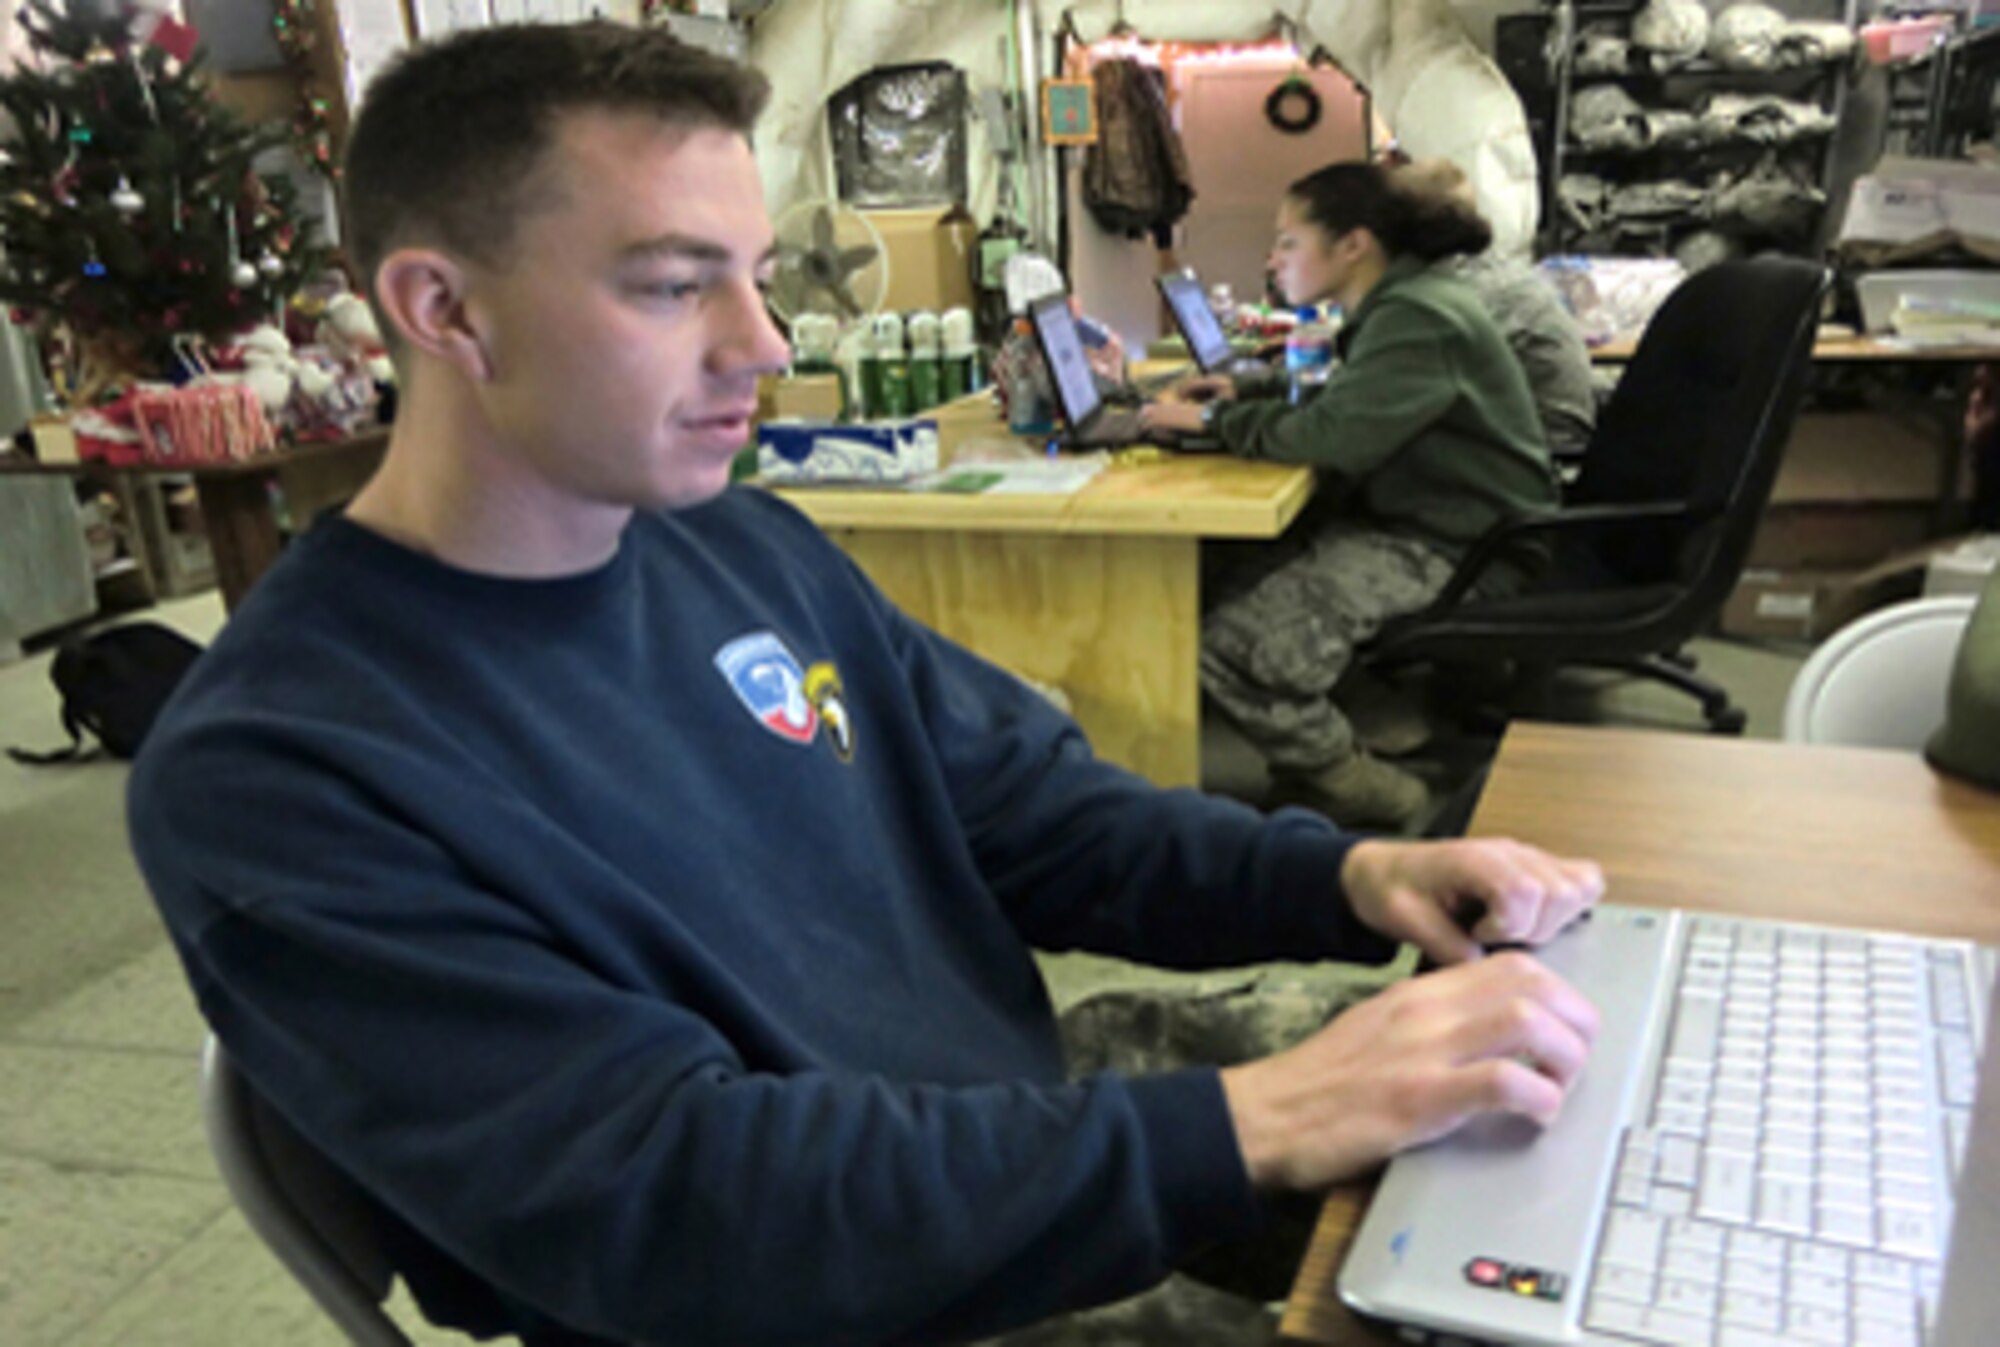 Army Staff Sgt. Kris Sapp uses a computer on the morale network Dec. 12, 2010, at the 455th Contingency Aeromedical Staging Facility at Bagram Airfield, Afghanistan. Sergeant Sapp is a 101st Airborne Division fire support specialist. He was wounded in Afghanistan's Ghazni province as the result of an improvised explosive device attack. (U.S. Air Force photo/Capt. Erick Saks)